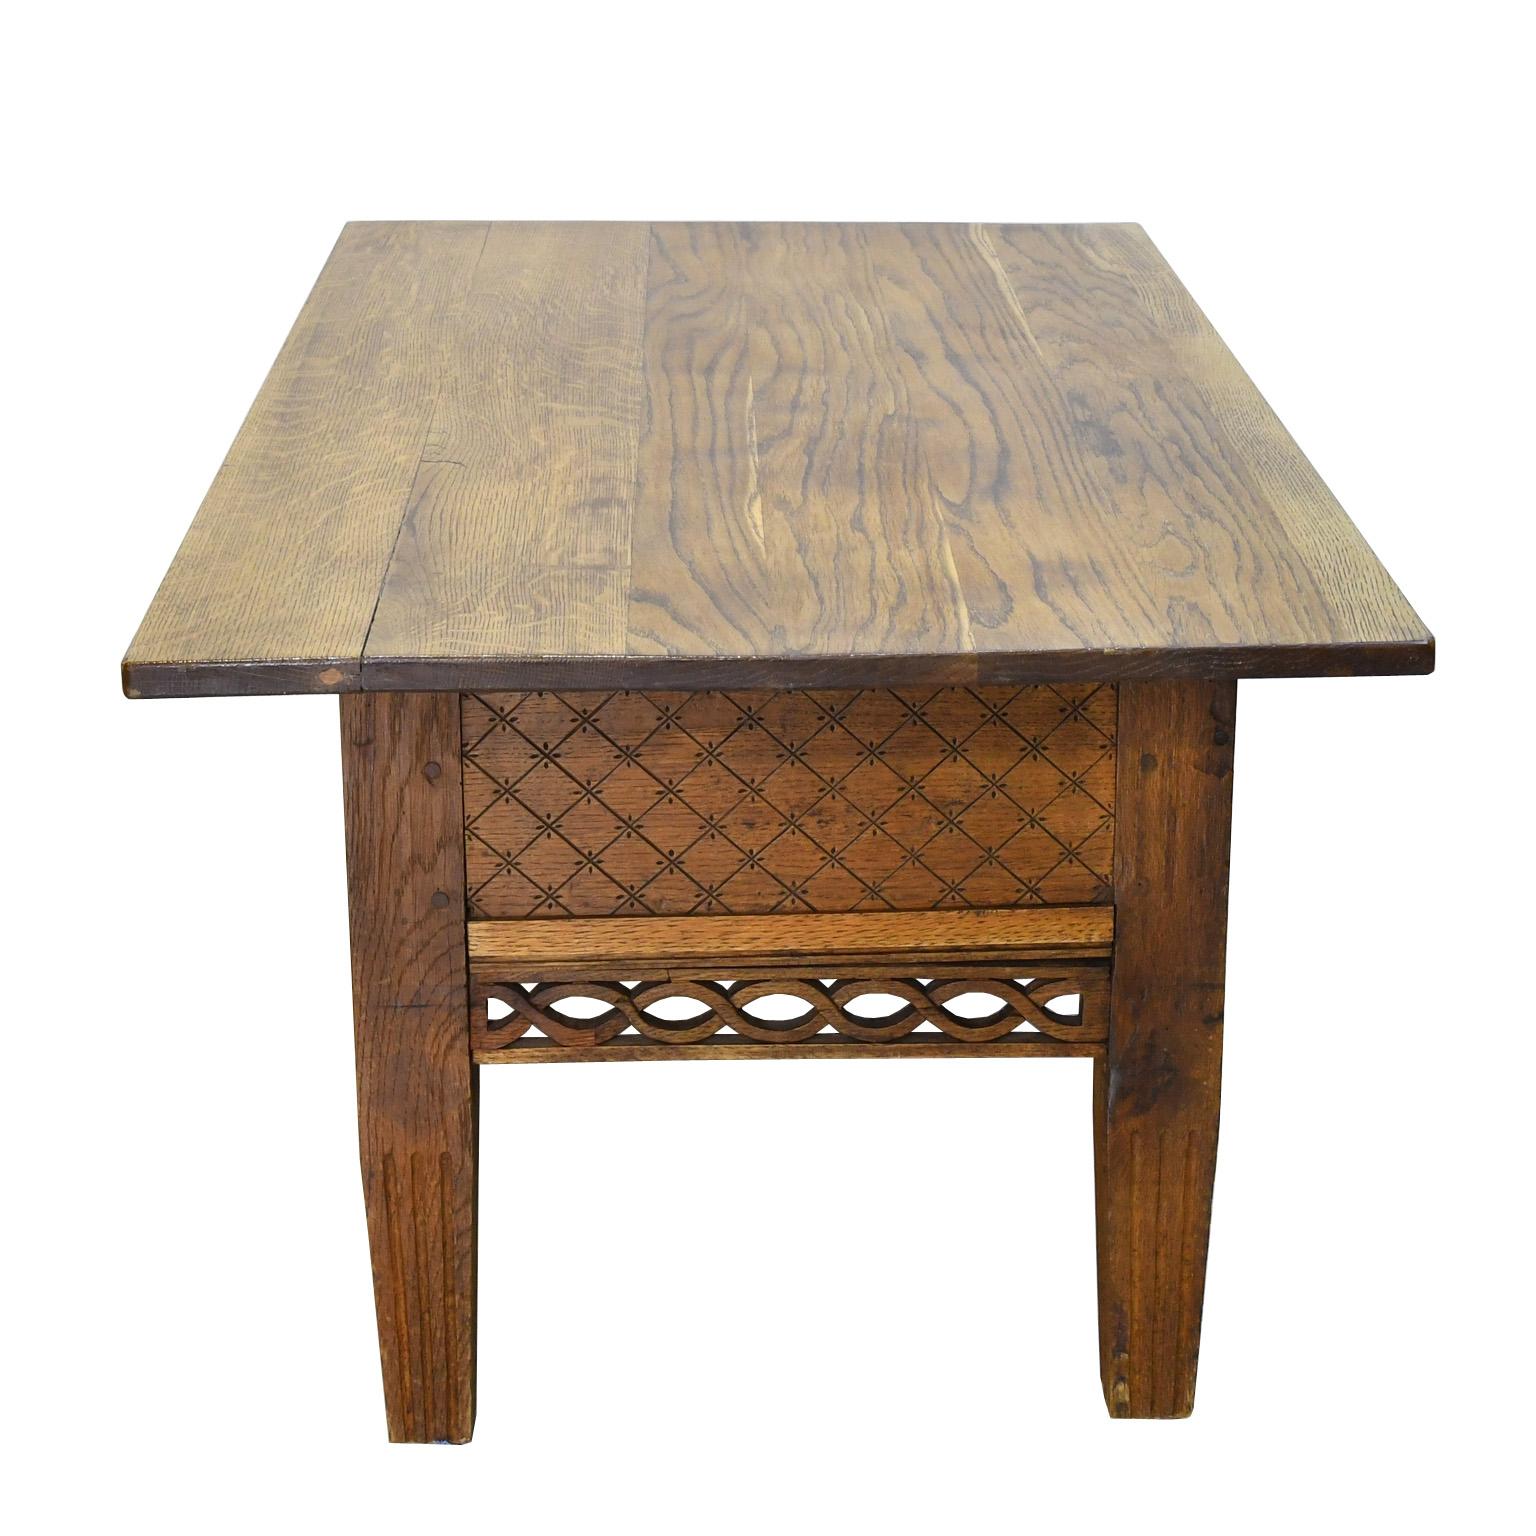 Carved Swedish Gustavian Oak Table with Pierced Fret Work on Apron, circa 1810